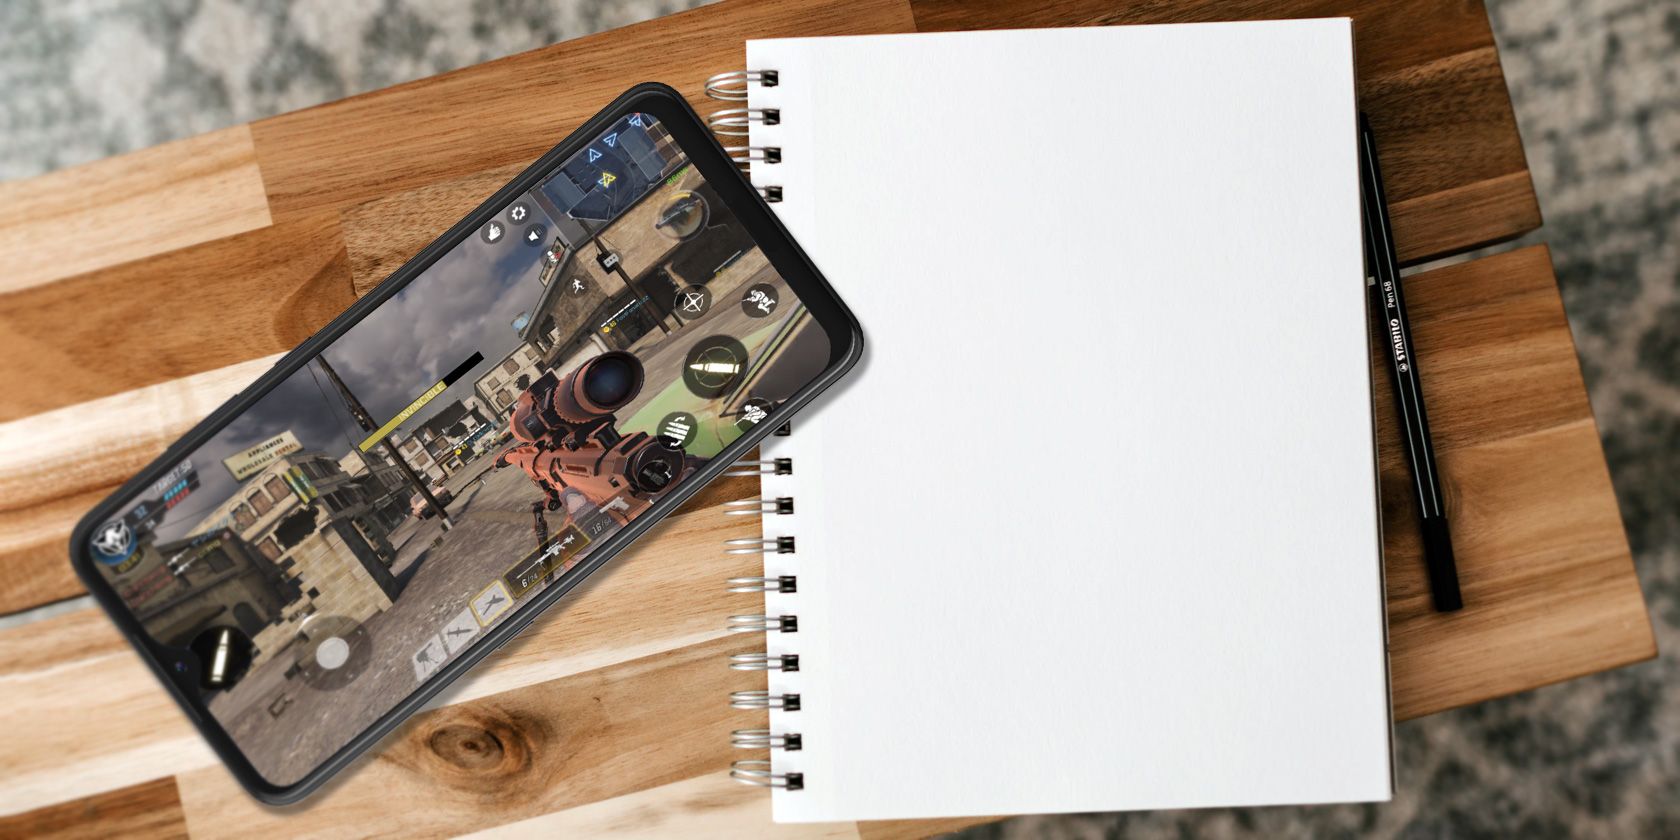 a mobile game on phone screen with notepad aside